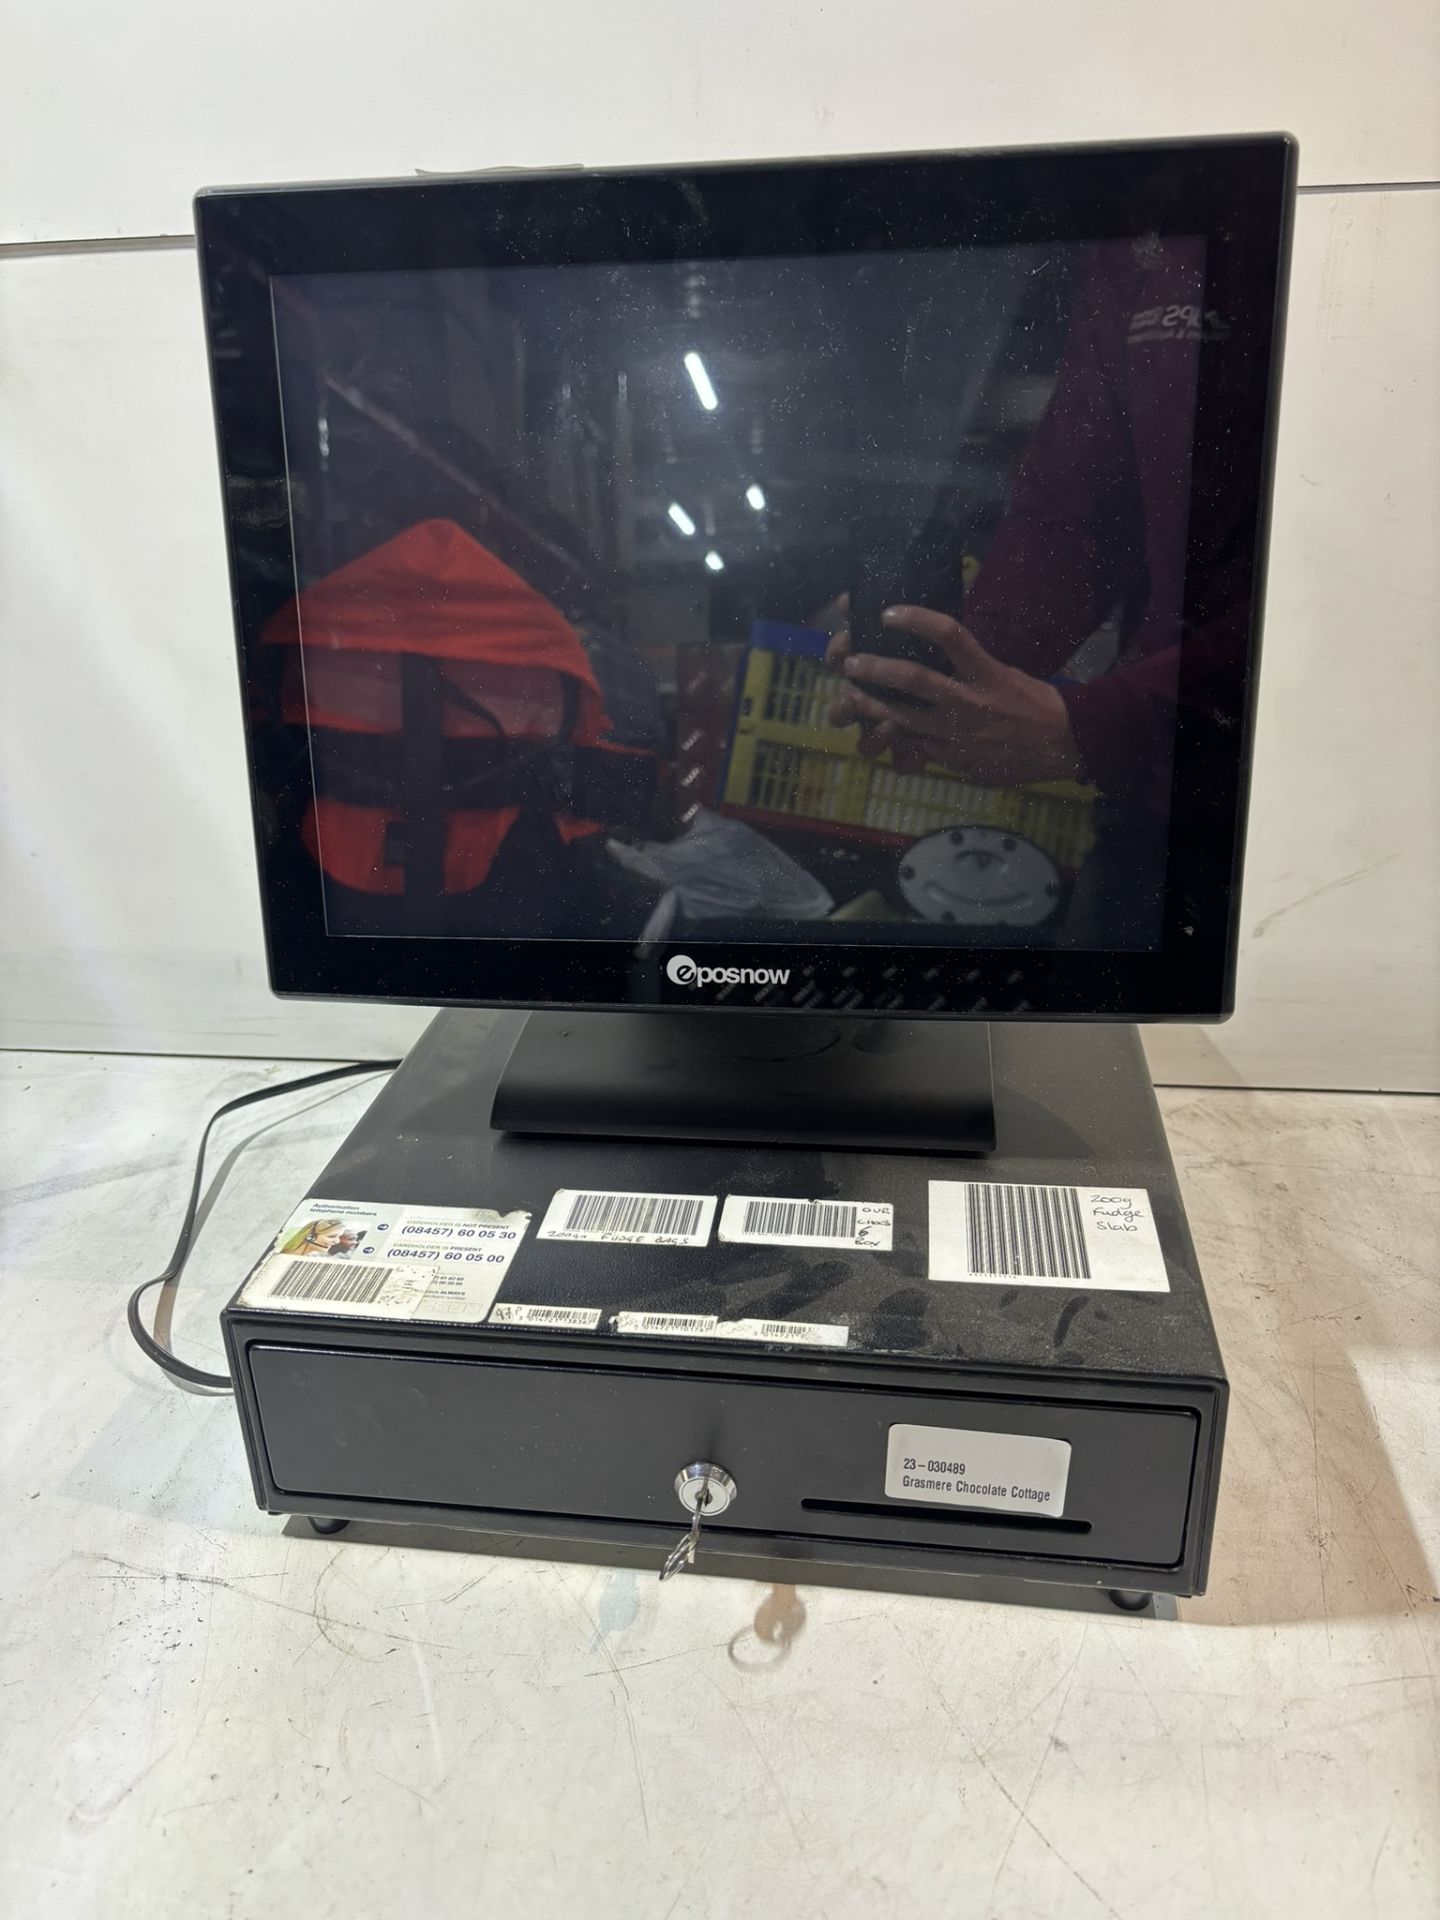 Eposnow EPOS System With Cash Drawer And Scanner As Seen In Photos - Image 2 of 5